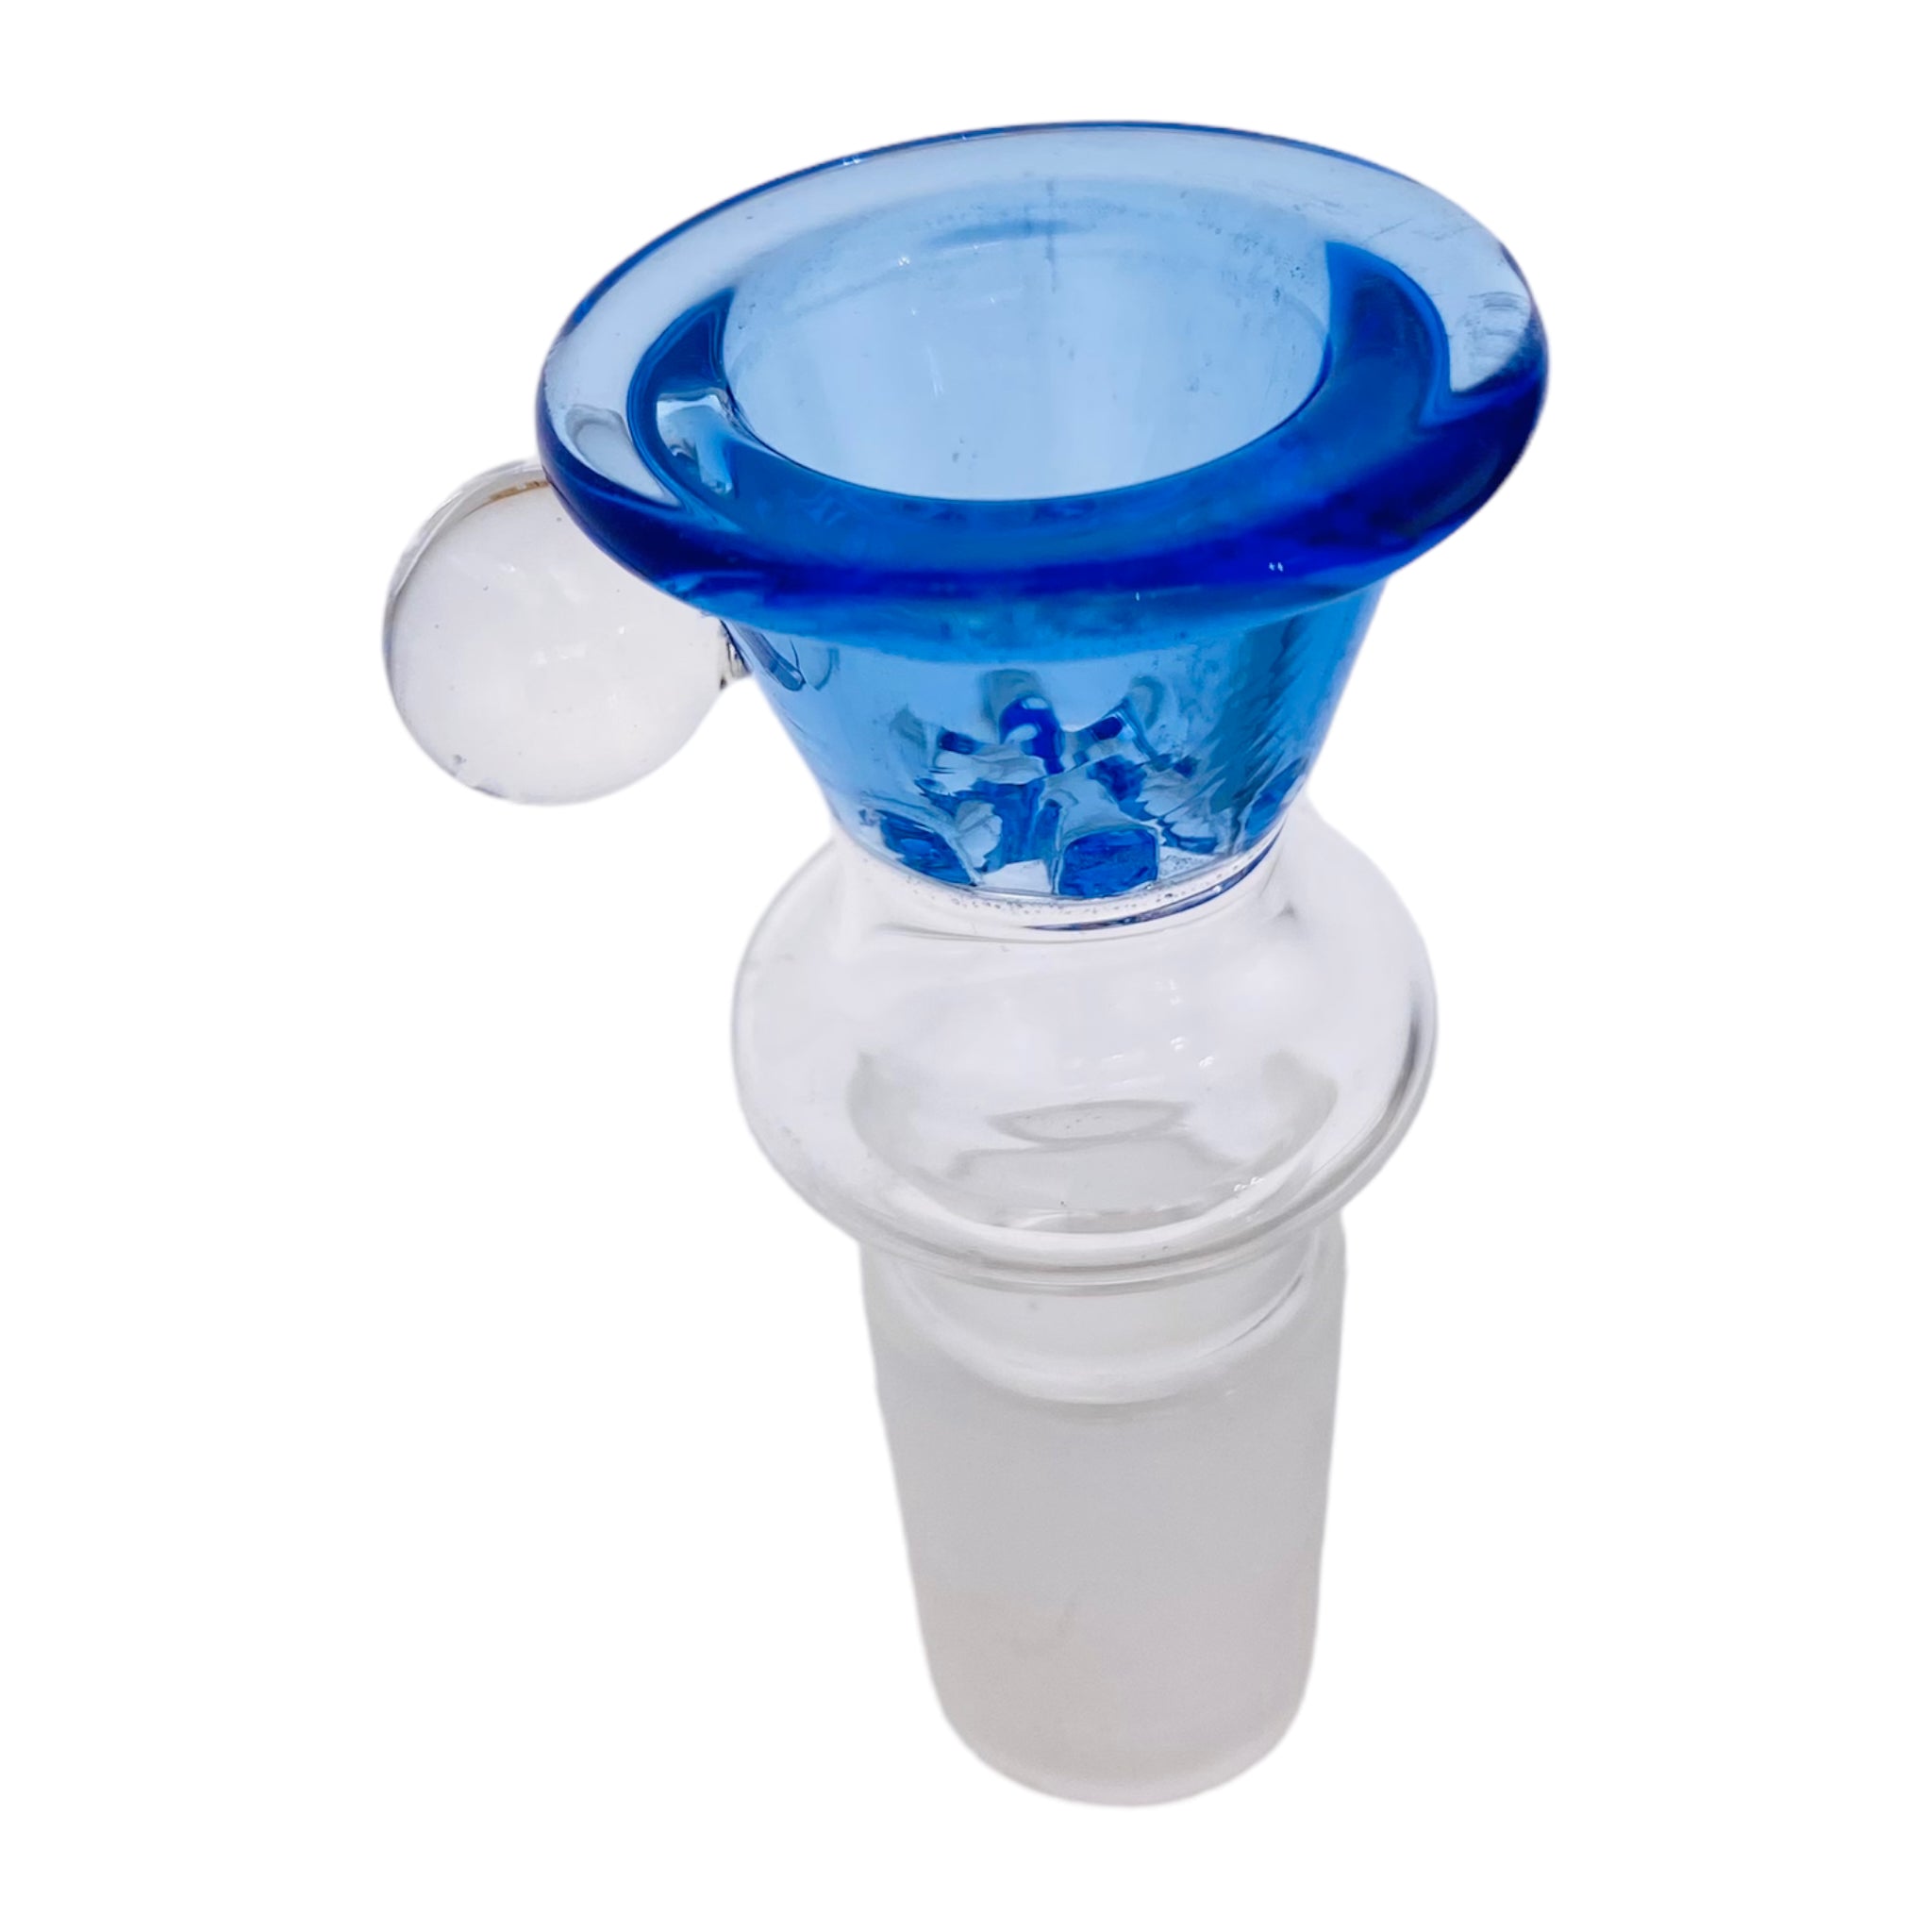 18mm Flower Bowl - Large Martini Funnel Bong Bowl Piece With Built In Screen - Blue